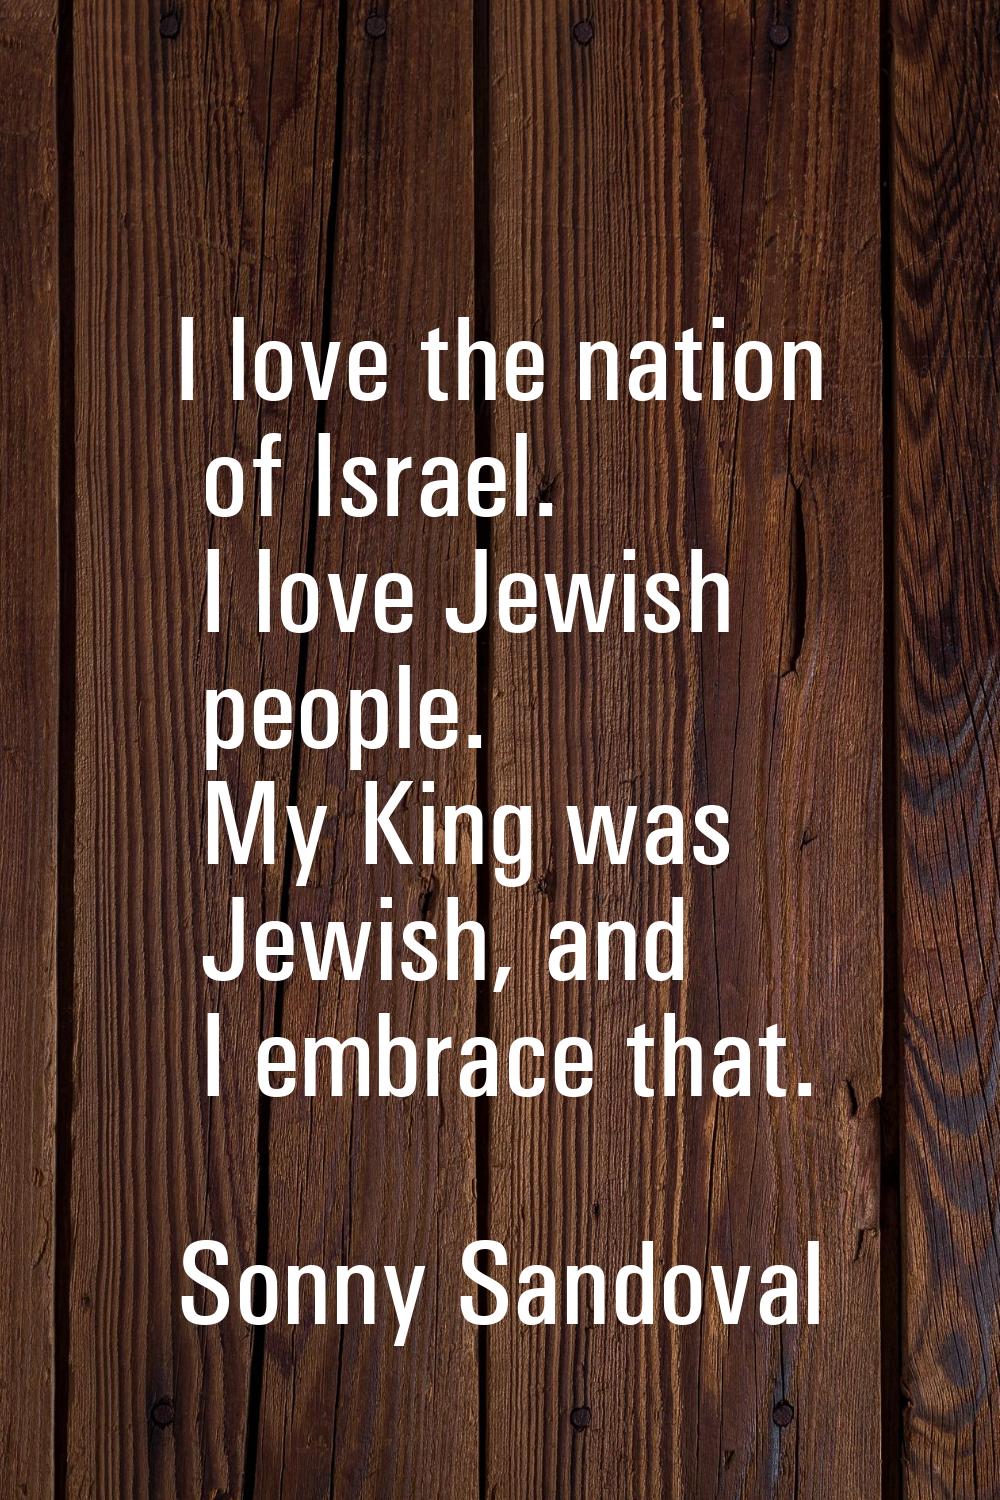 I love the nation of Israel. I love Jewish people. My King was Jewish, and I embrace that.